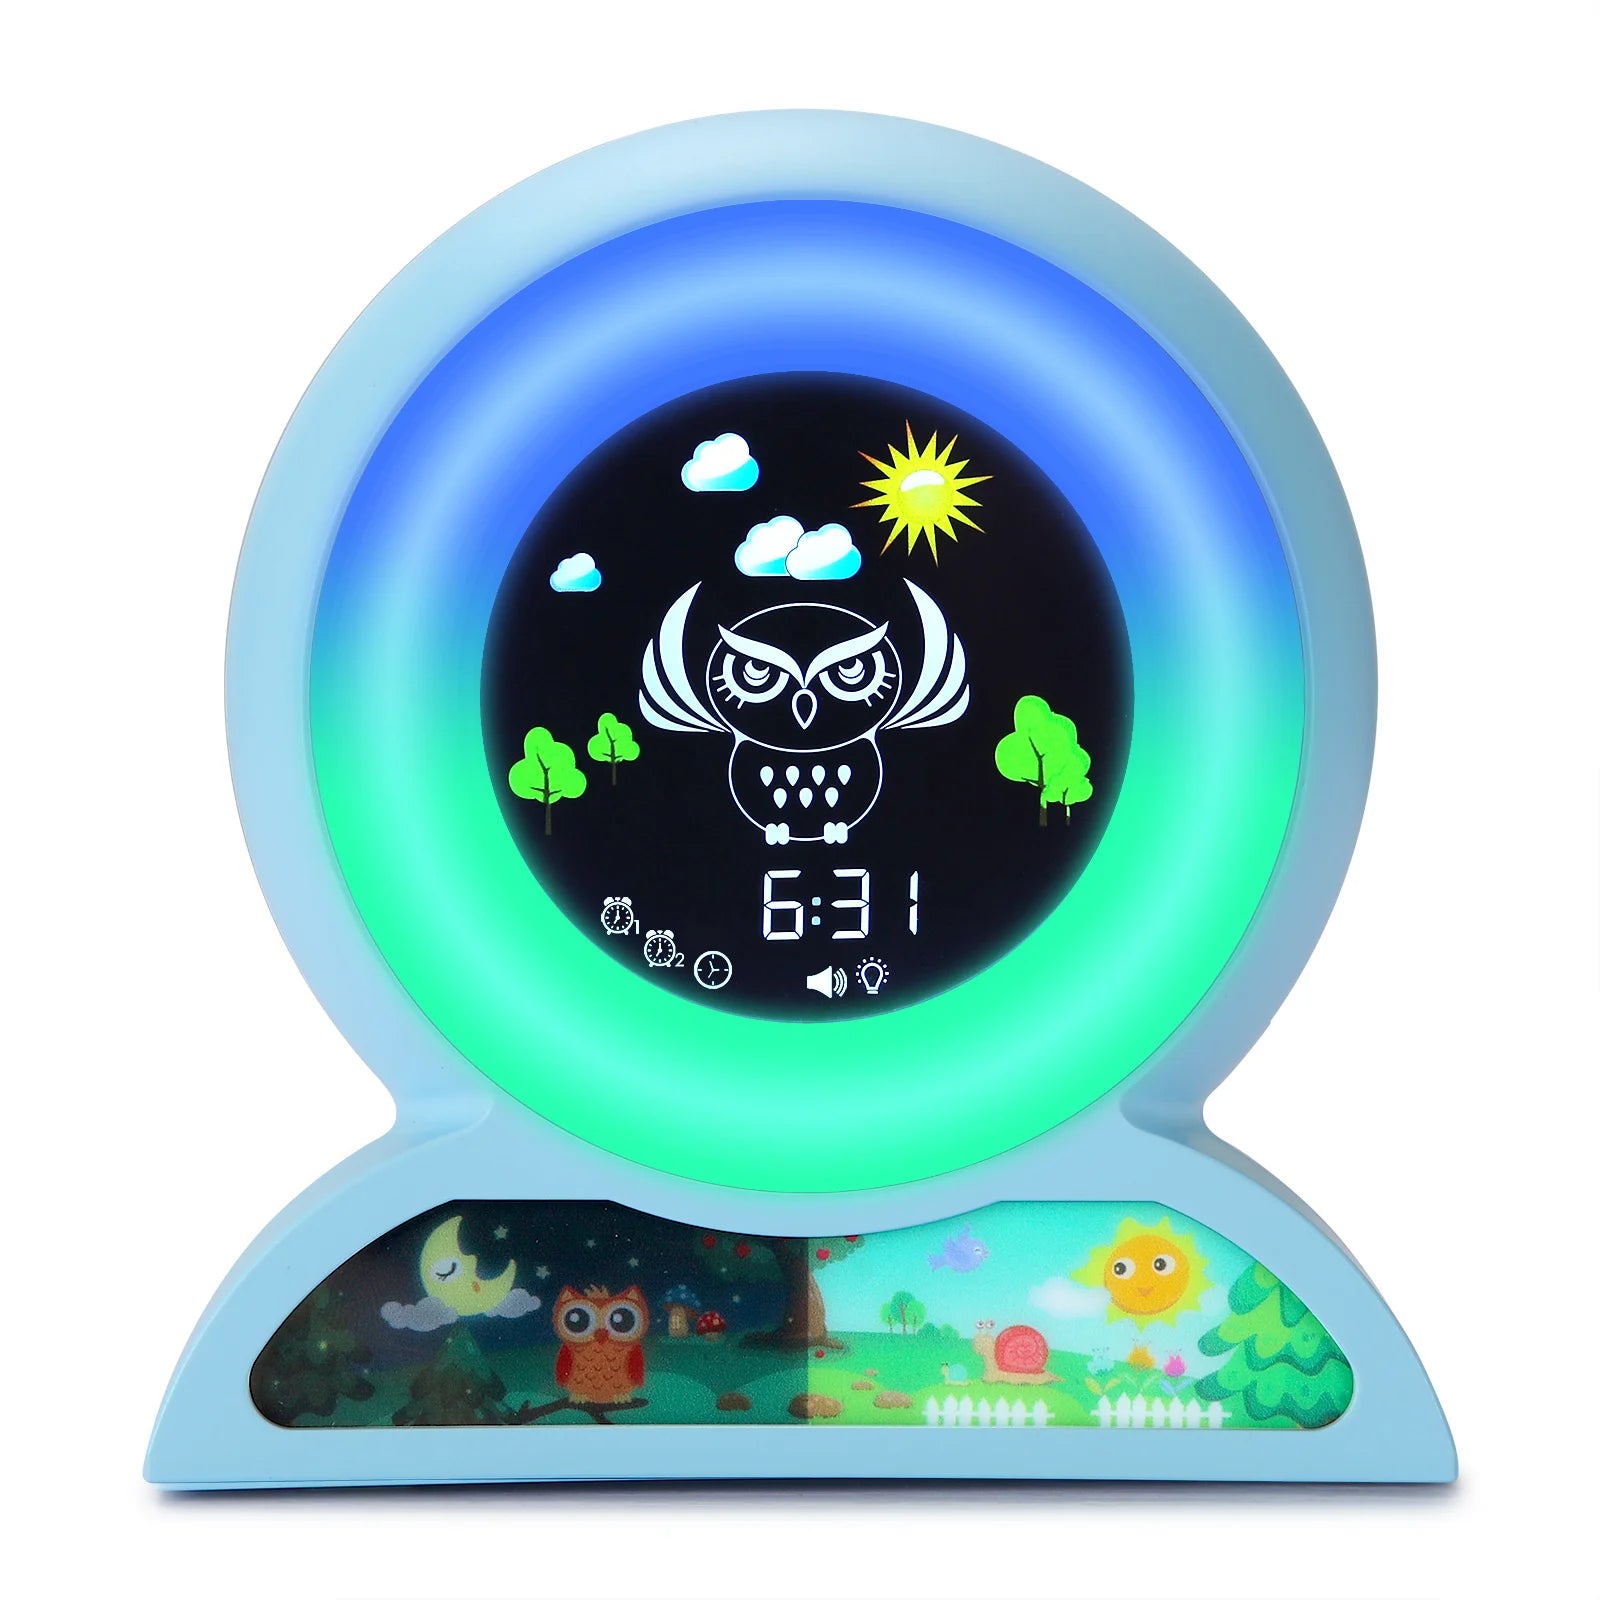 Child Alarm Clock with Cute Animal Design, Sleep Trainer, Digital Wake-Up, Colorful Night Light, Snooze, Temperature, NAP Timer - Perfect for Kids Blue Owl